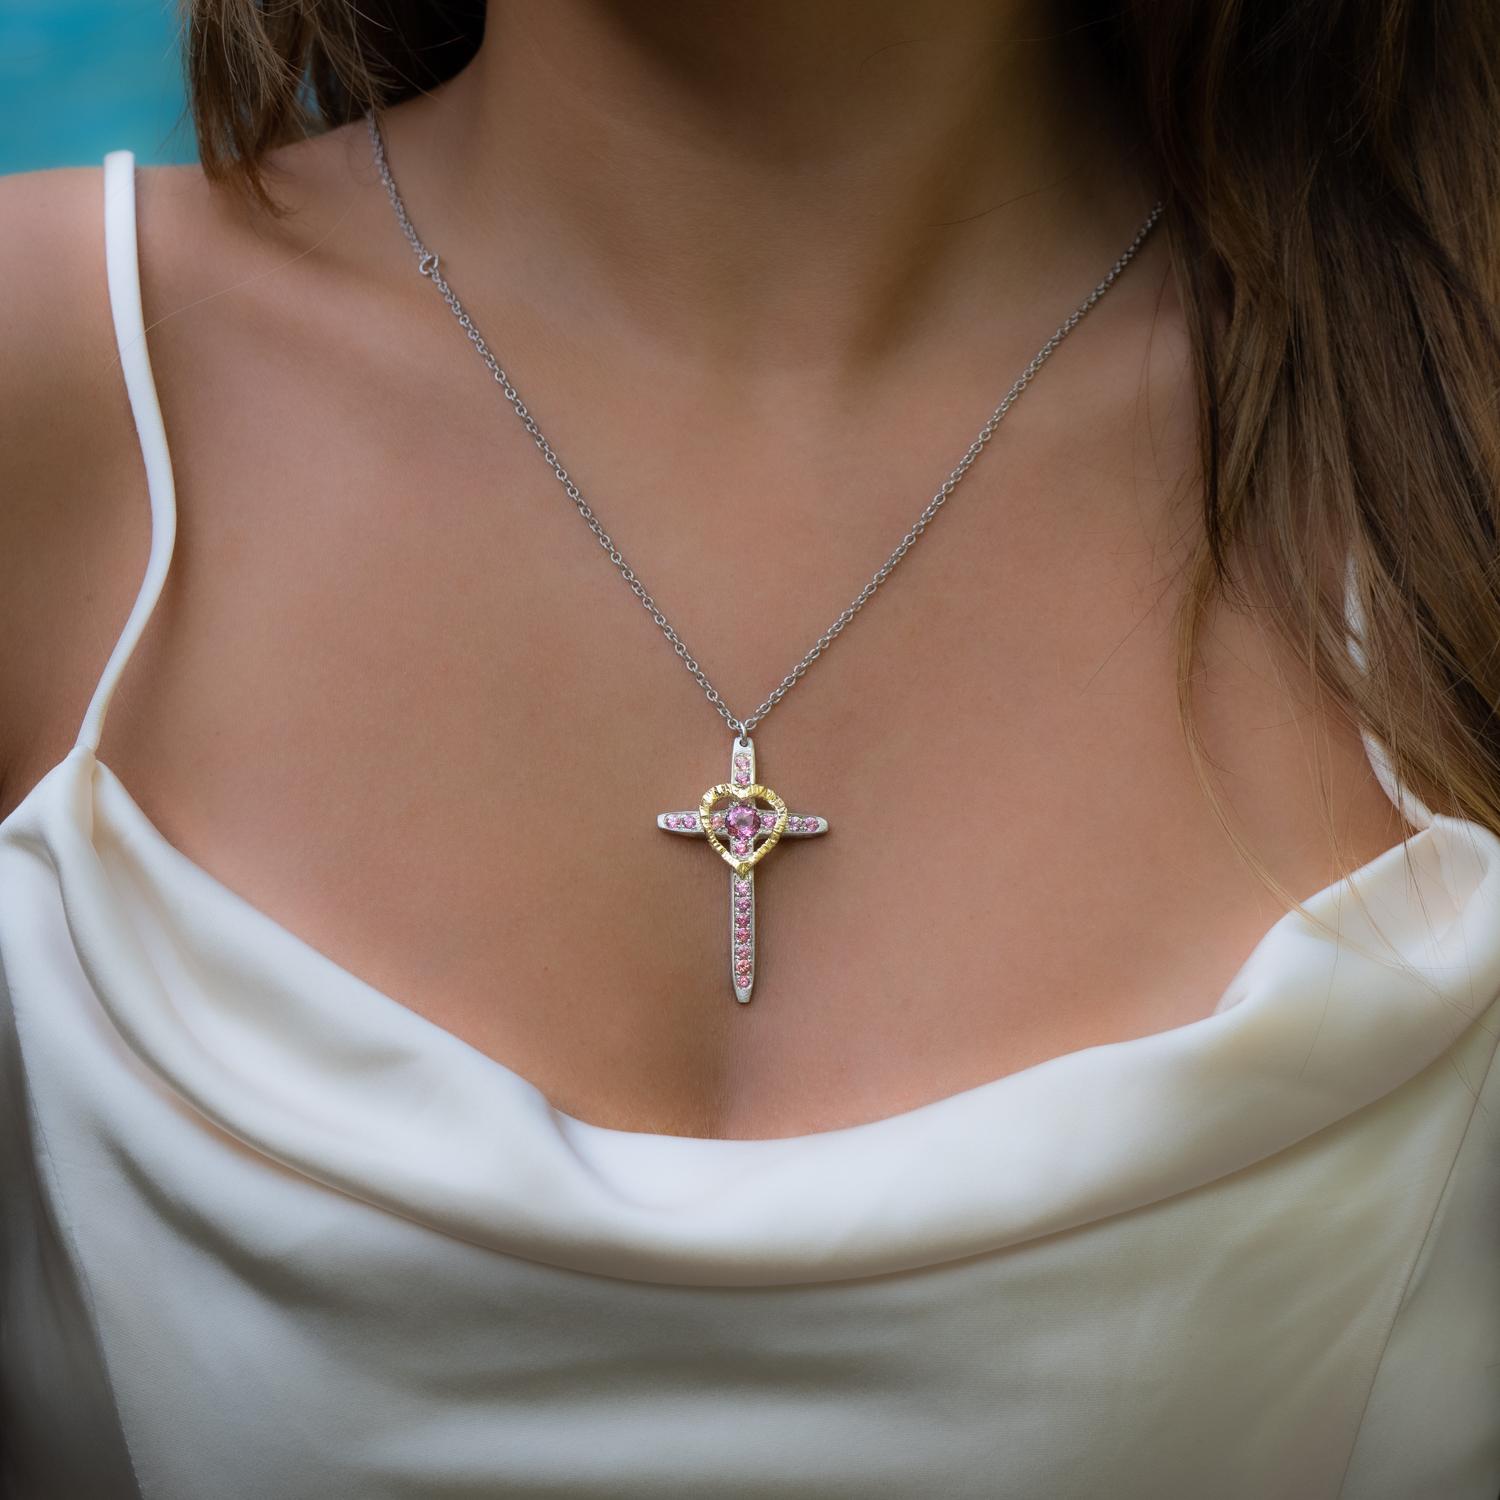 This elegant cross and heart necklace is a unique blend of traditional and modern design. The cross, a timeless symbol of faith and devotion, is adorned with beautiful pink topaz, adding a touch of color and elegance to the piece. The pink topaz